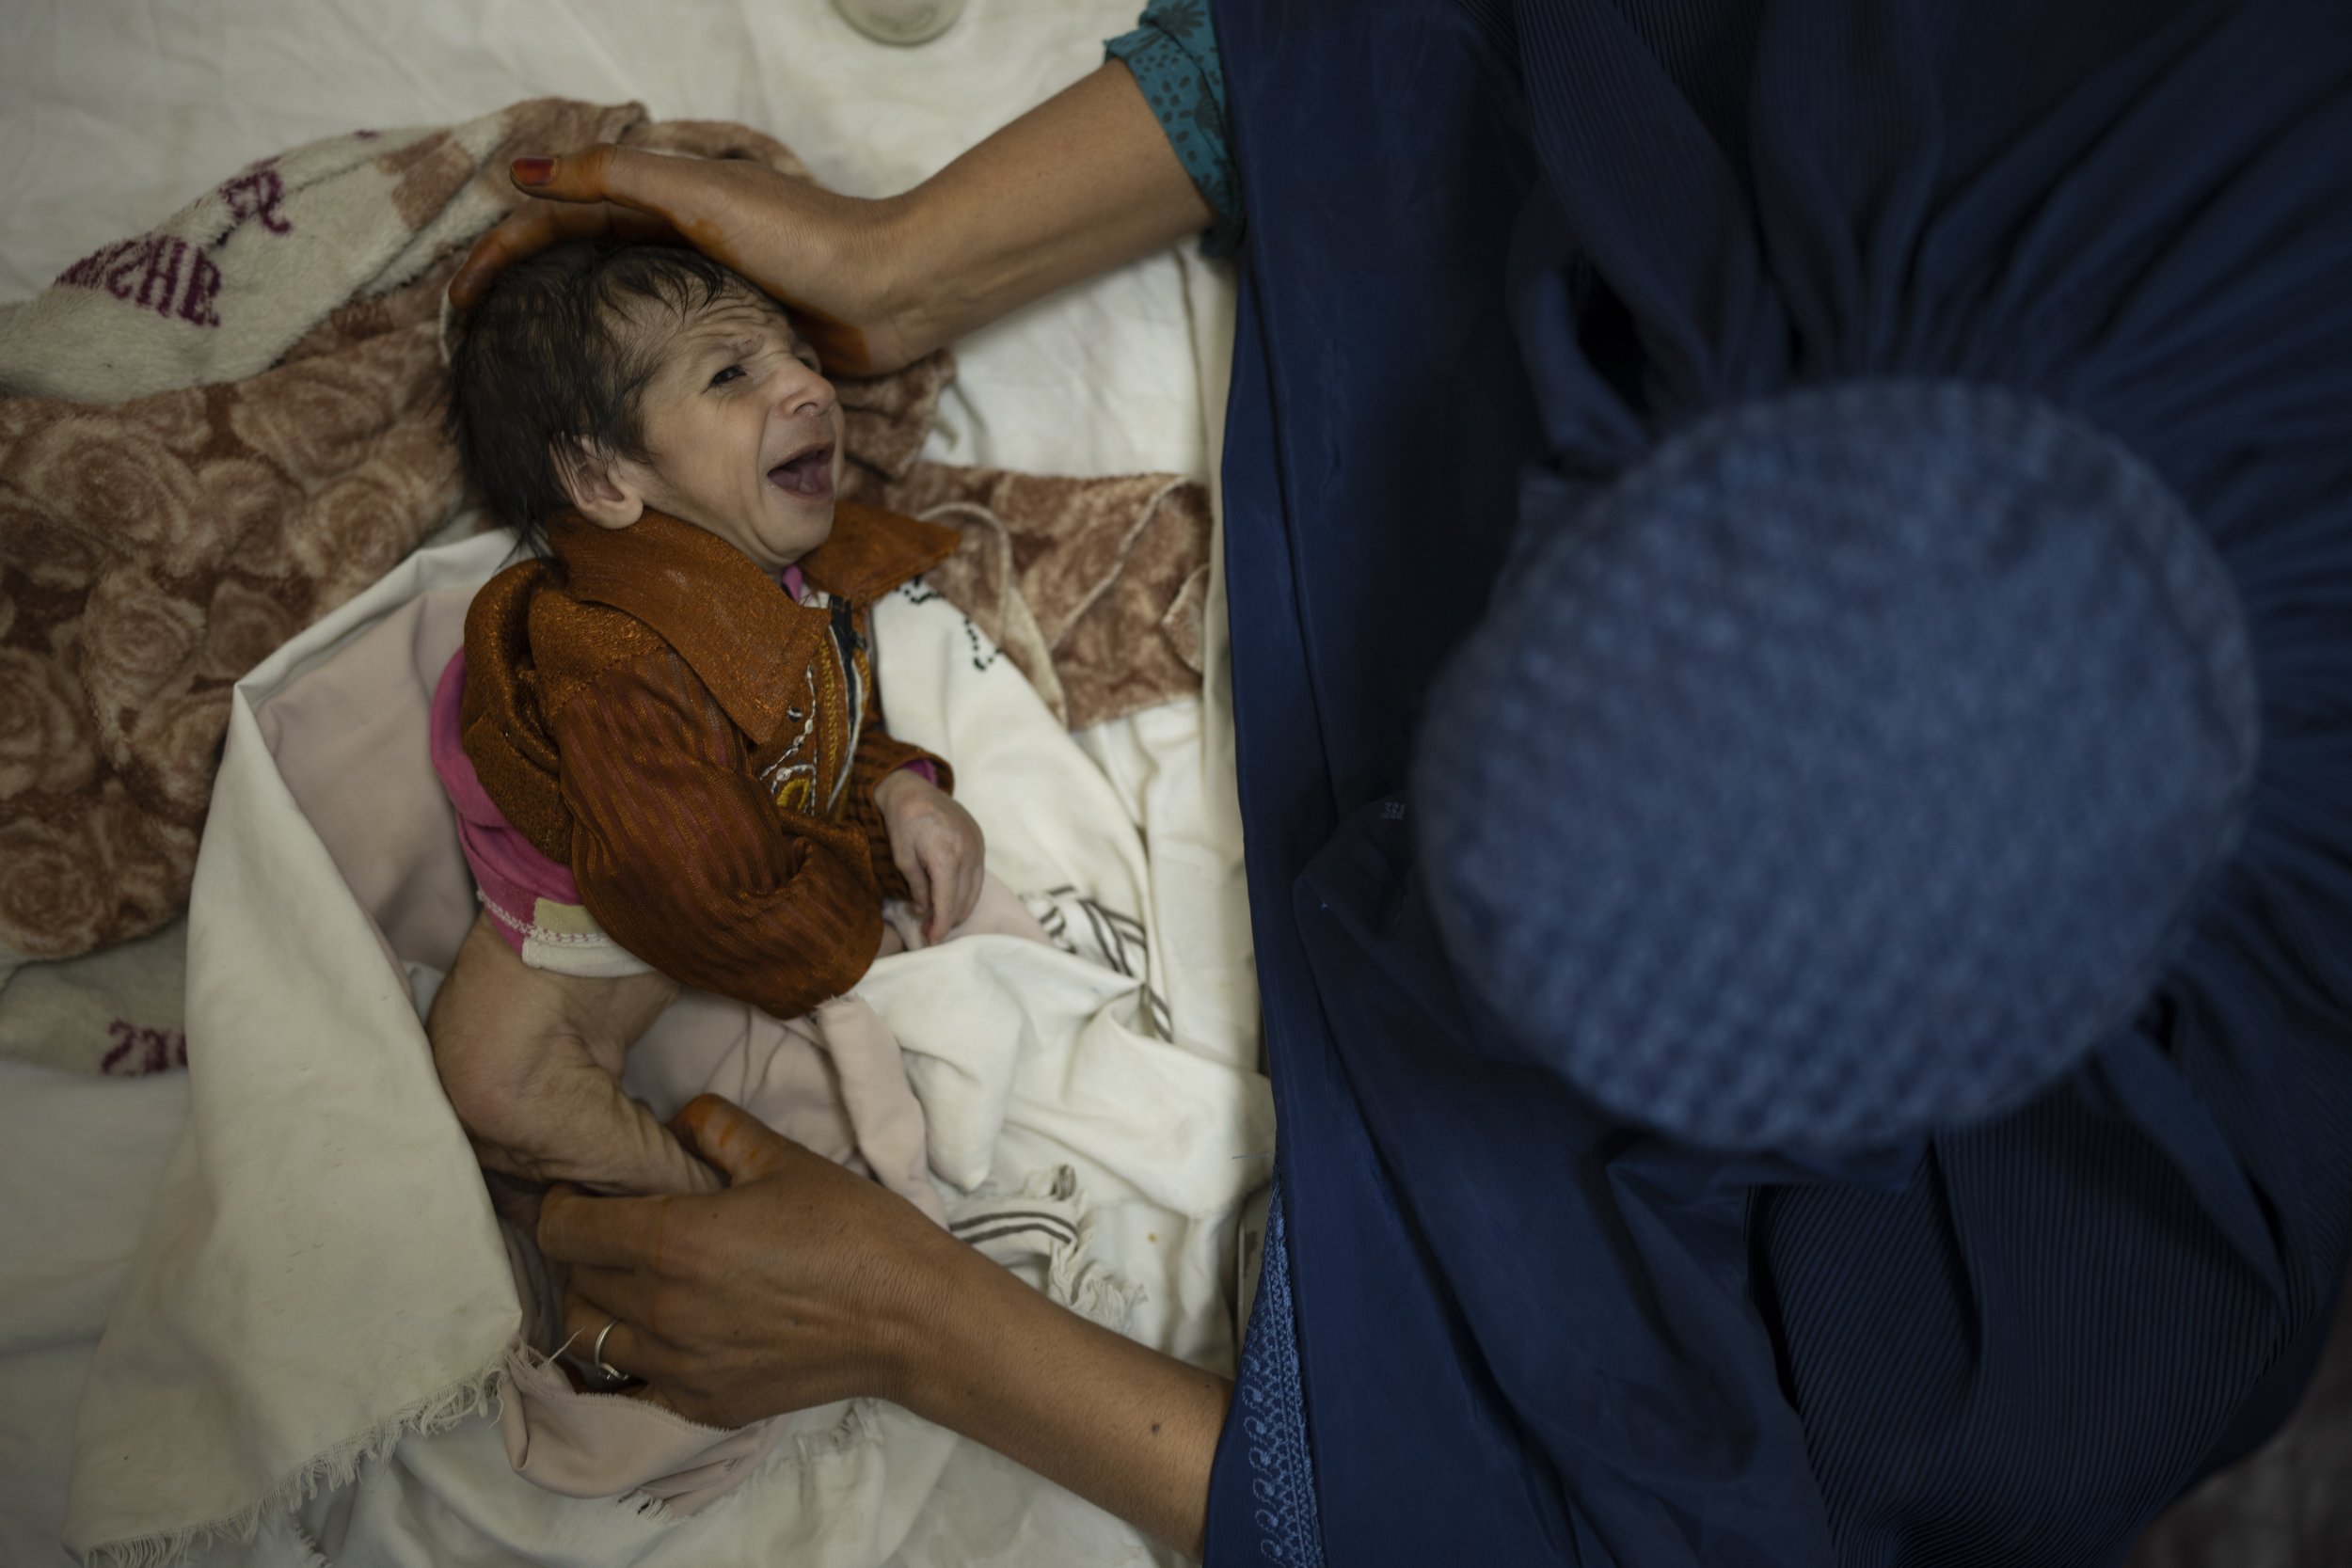  Sofia cradles her 2-month-old baby, Abdul, as he undergoes treatment at the malnutrition ward of the Indira Gandhi Children's Hospital in Kabul, Afghanistan, on Oct. 5, 2021. (AP Photo/Felipe Dana) 